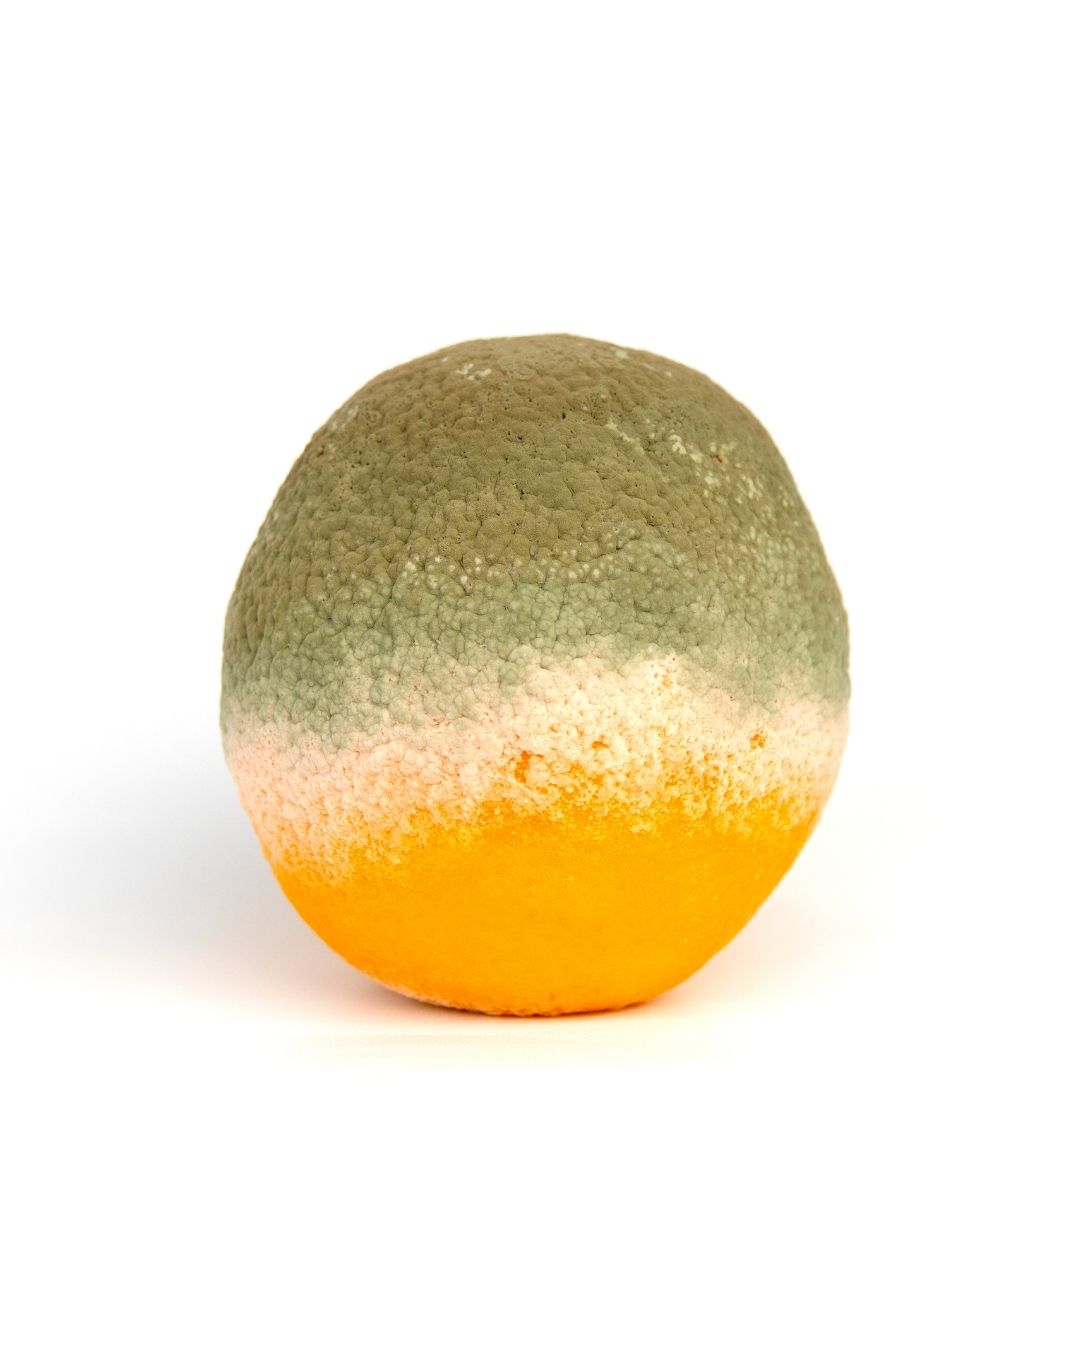 The upper half of an orange is covered with greenish mold, a border of beige mold divides the healthy orange from the green mold